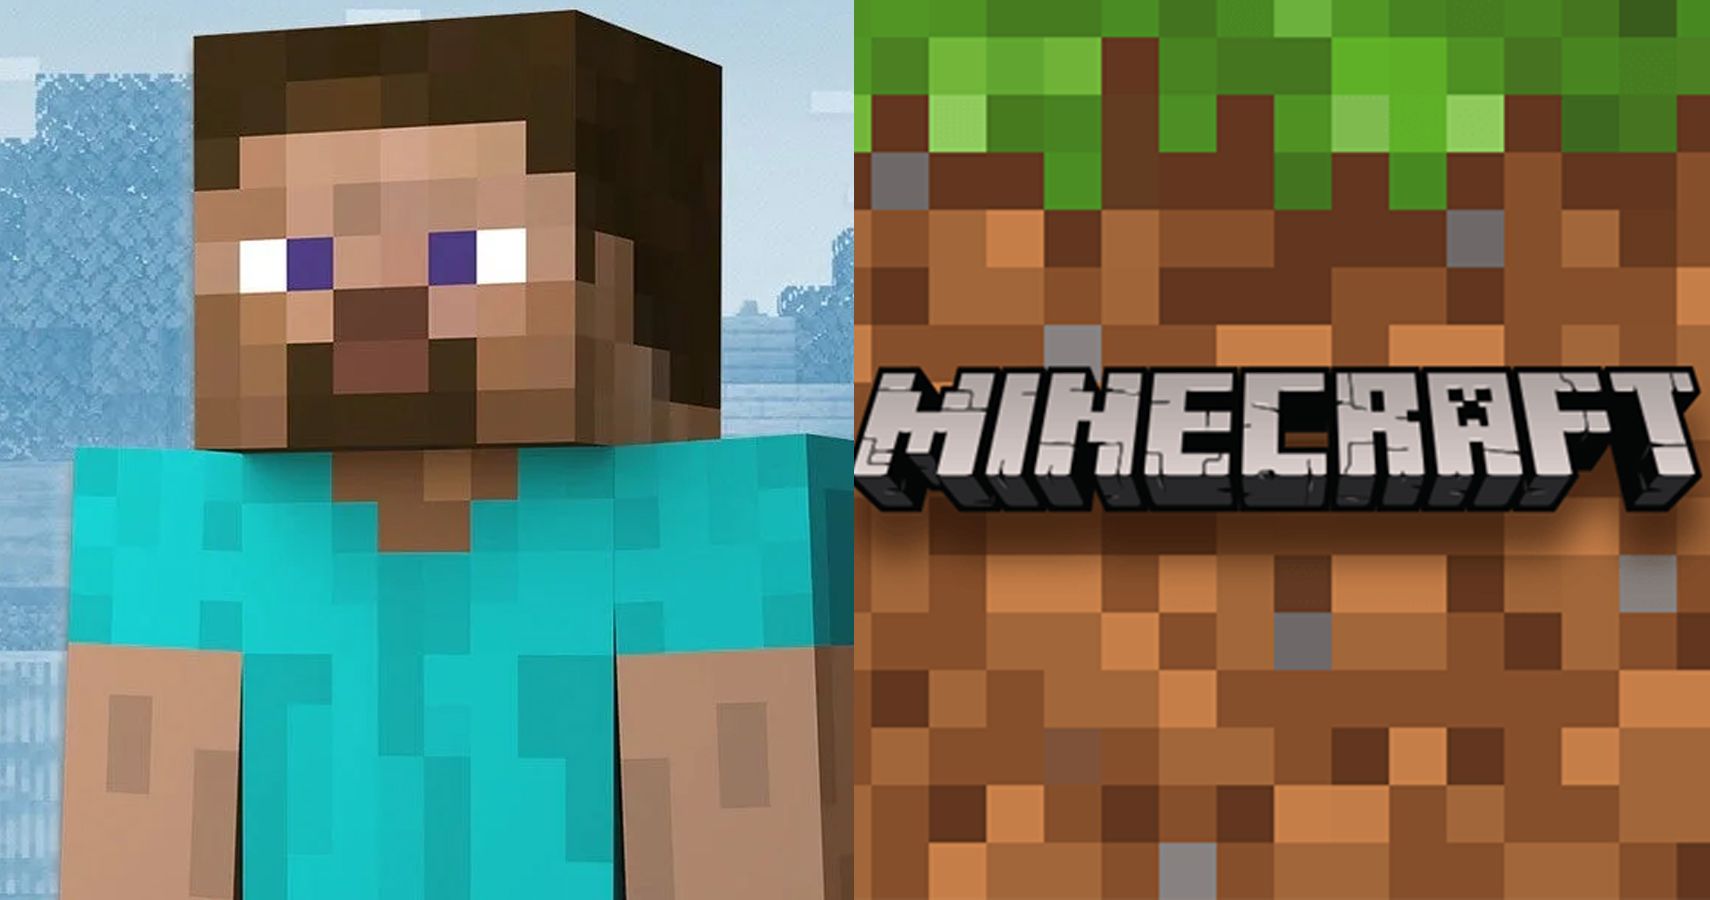 Minecraft Minigames - how to articles from wikiHow